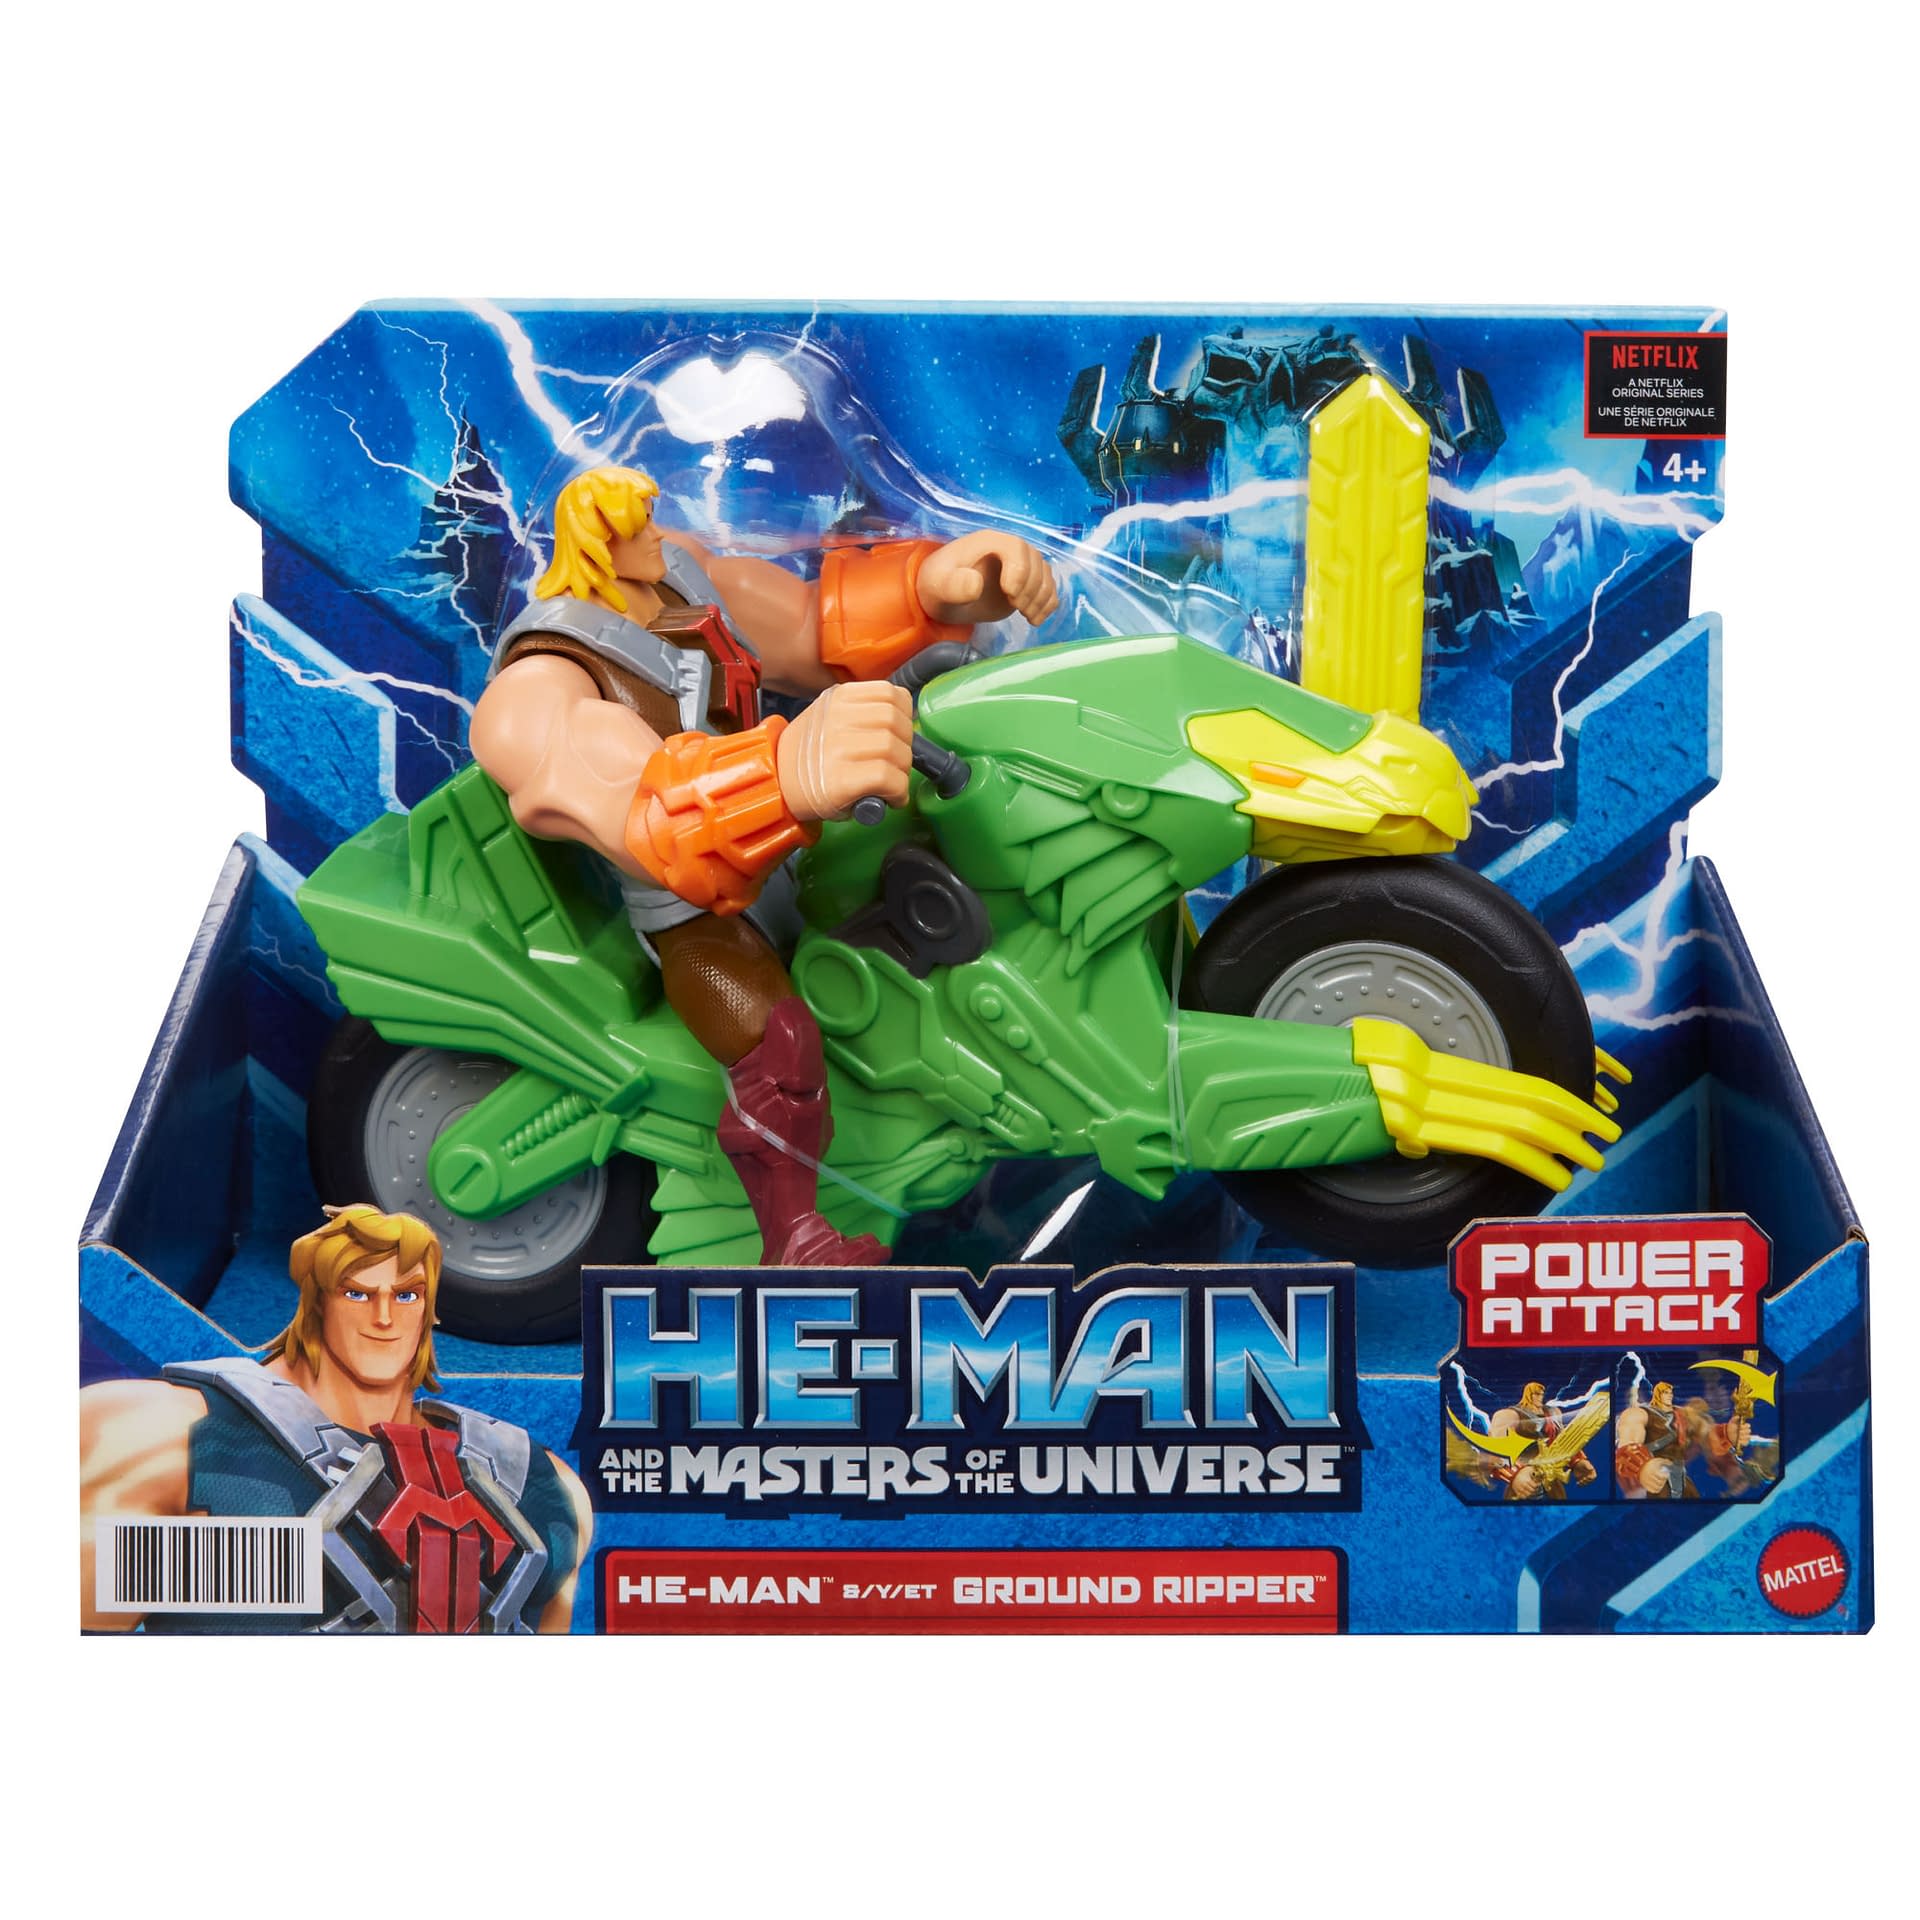 HE-MAN AND THE MASTERS OF THE UNIVERSE POWER ATTACK 3 man-at-arms 